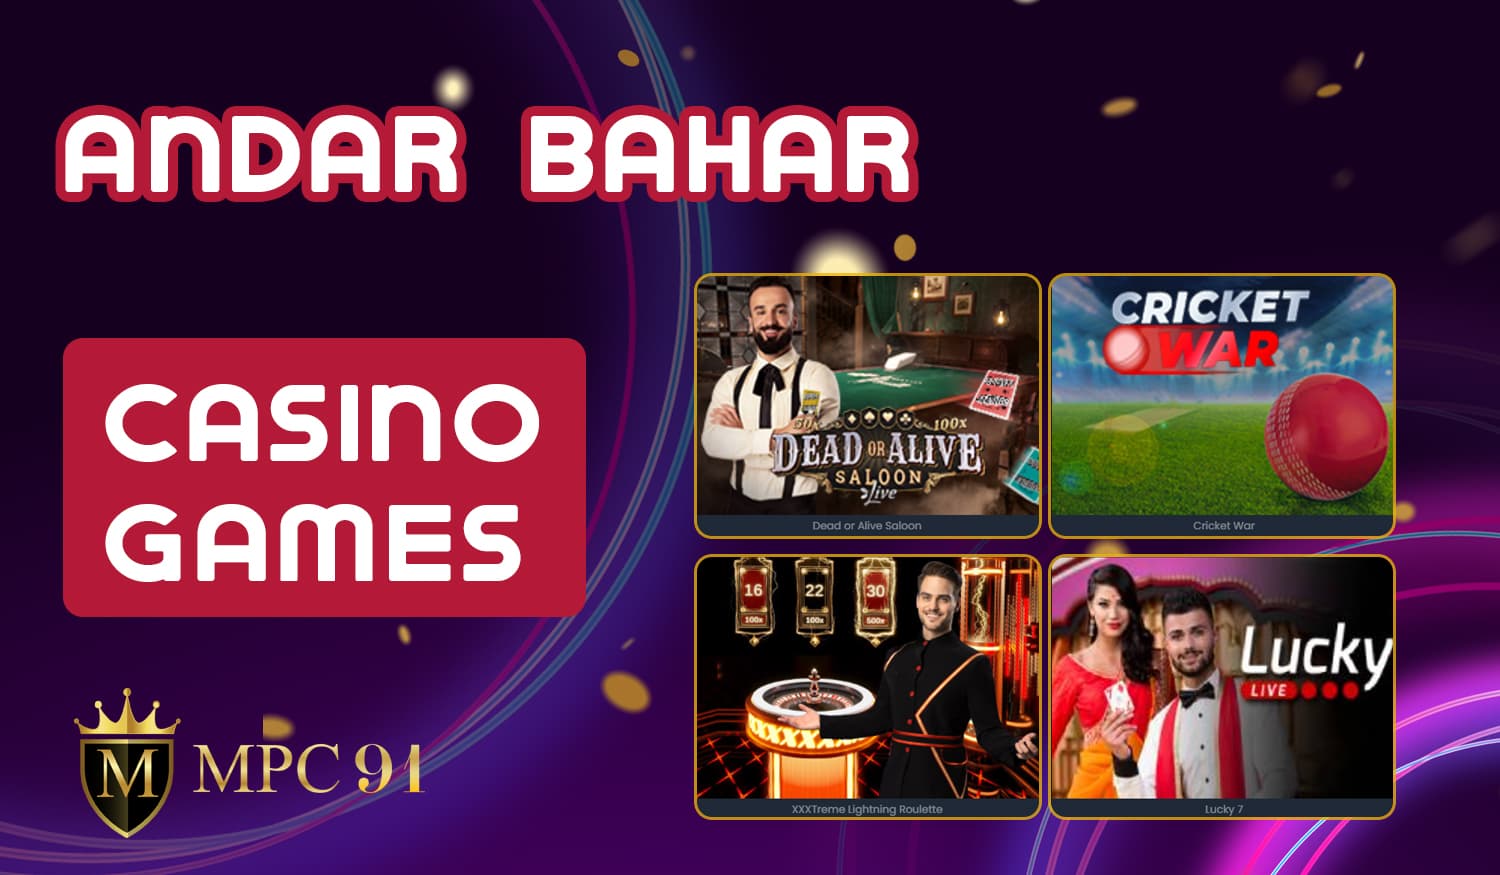 What games are available in the online casino section of MPC91 Casino for Indian users